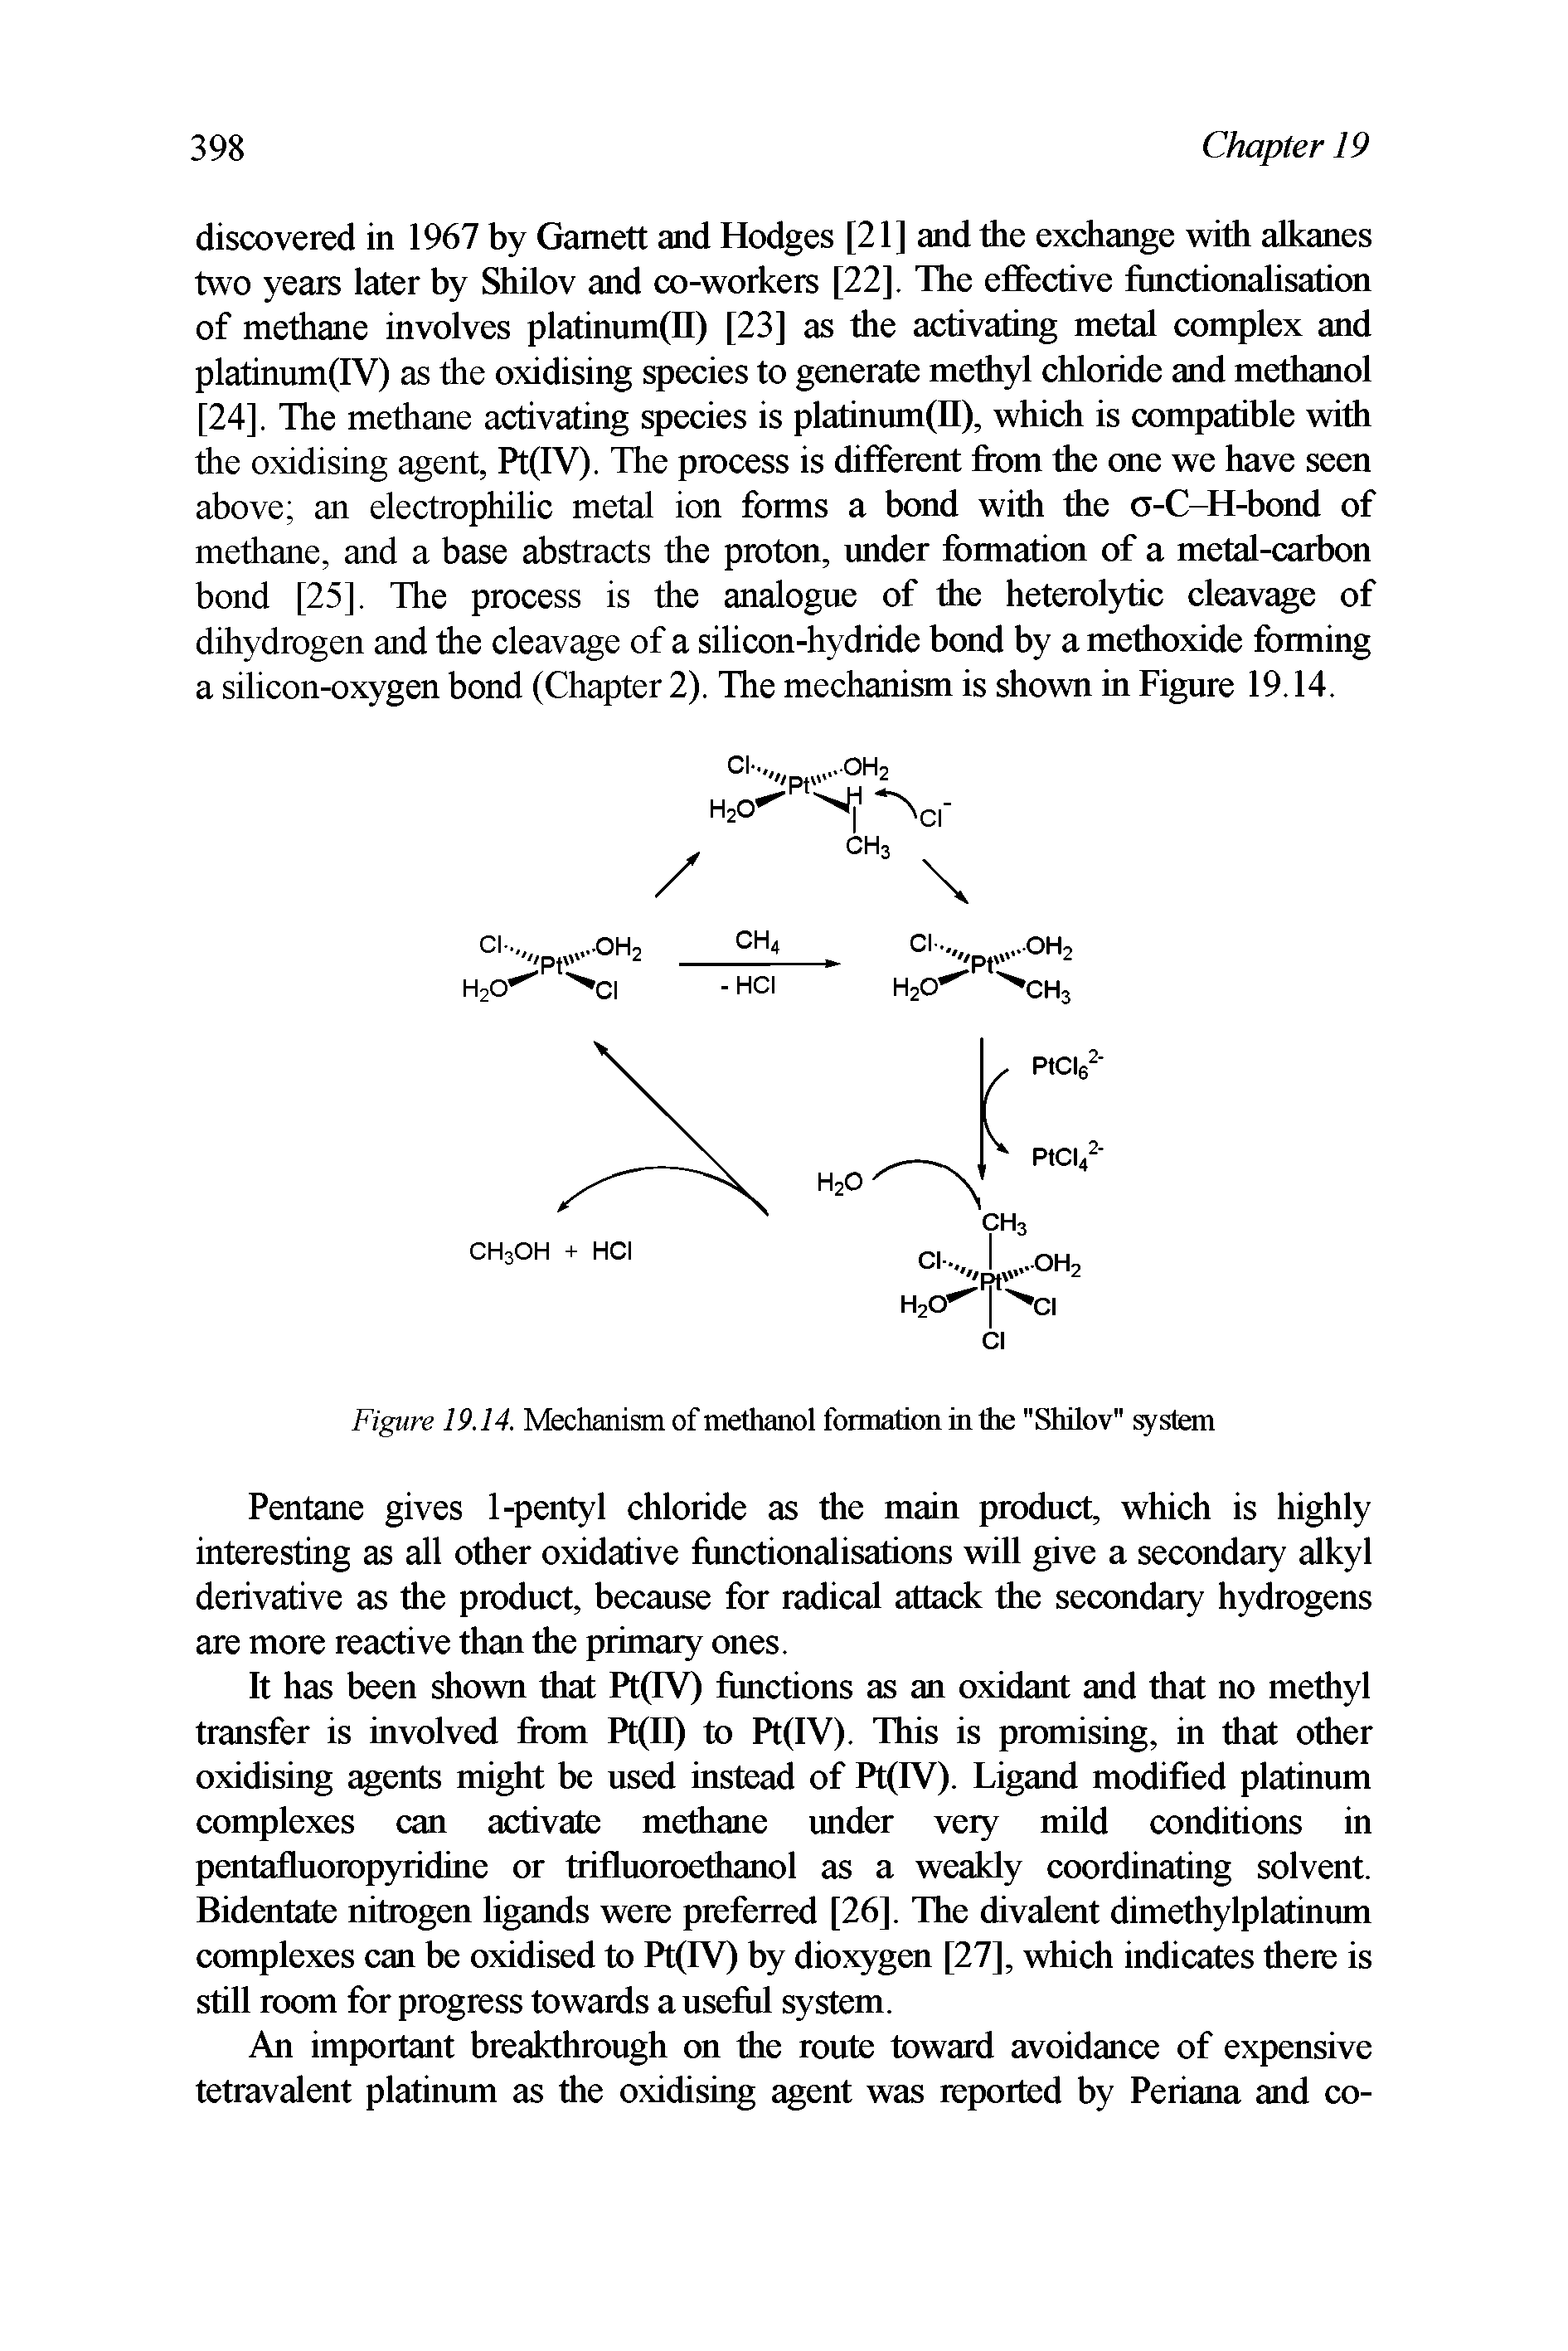 Figure 19.14. Mechanism of methanol formation in the "Shilov" system...